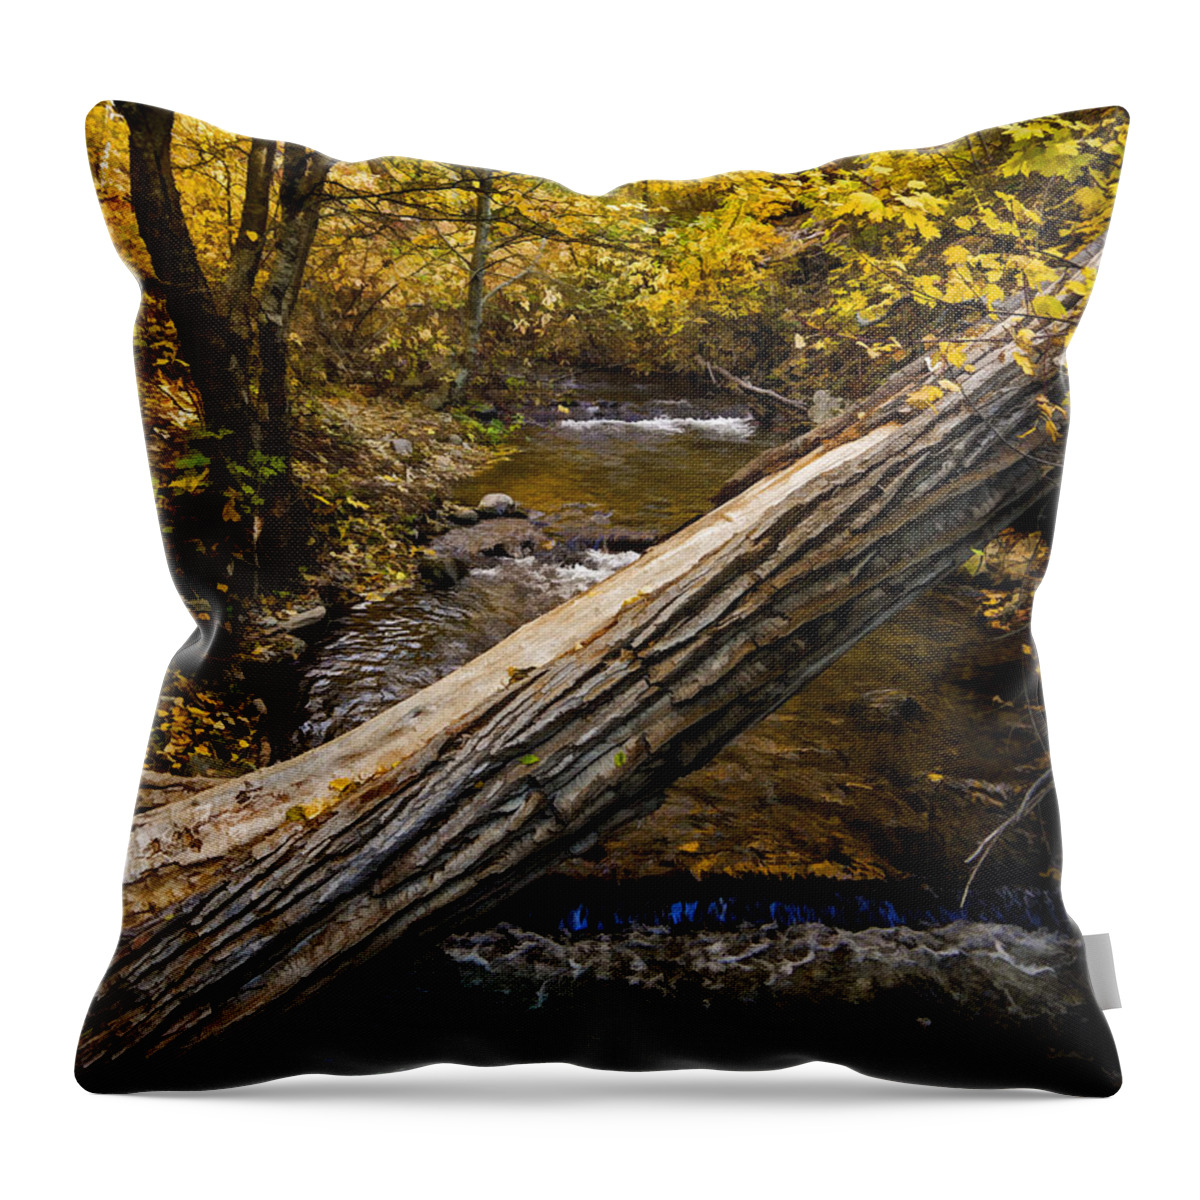 Discover Our Strengths Throw Pillow featuring the photograph Discover Our Strengths by Jordan Blackstone